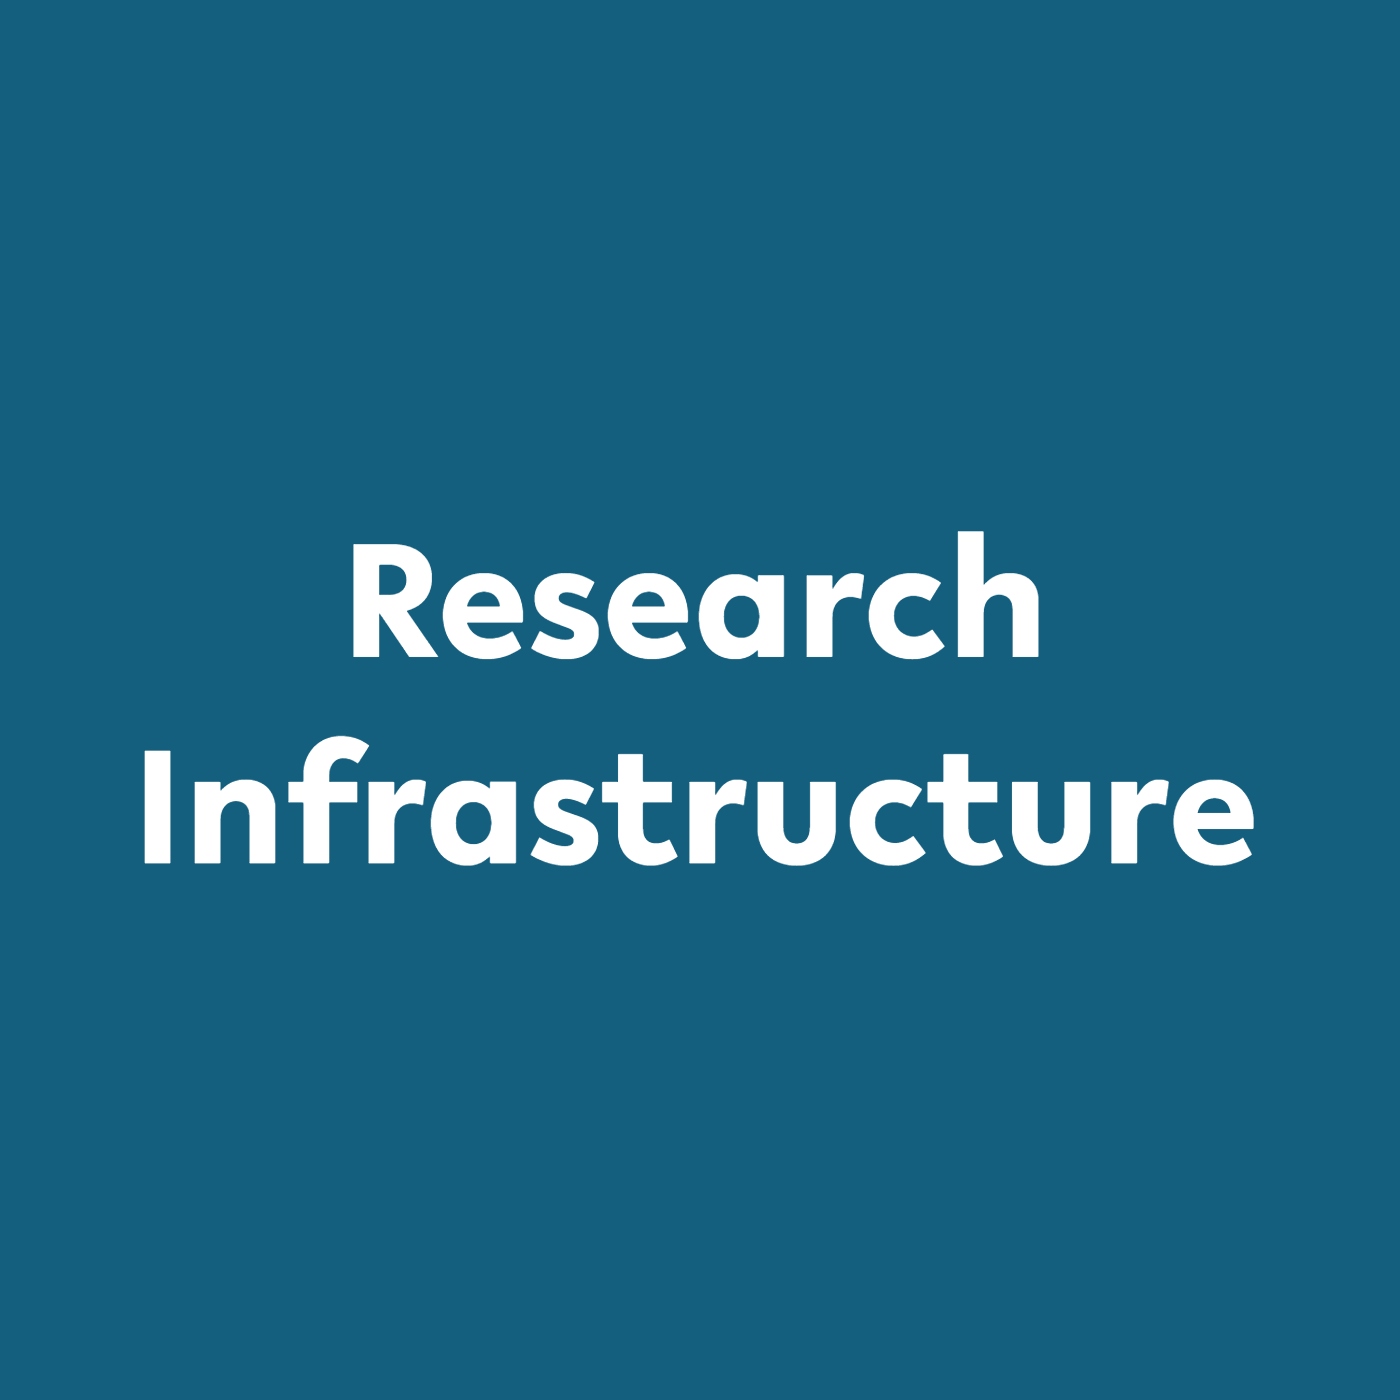 Blue box with text Research Infrastructure